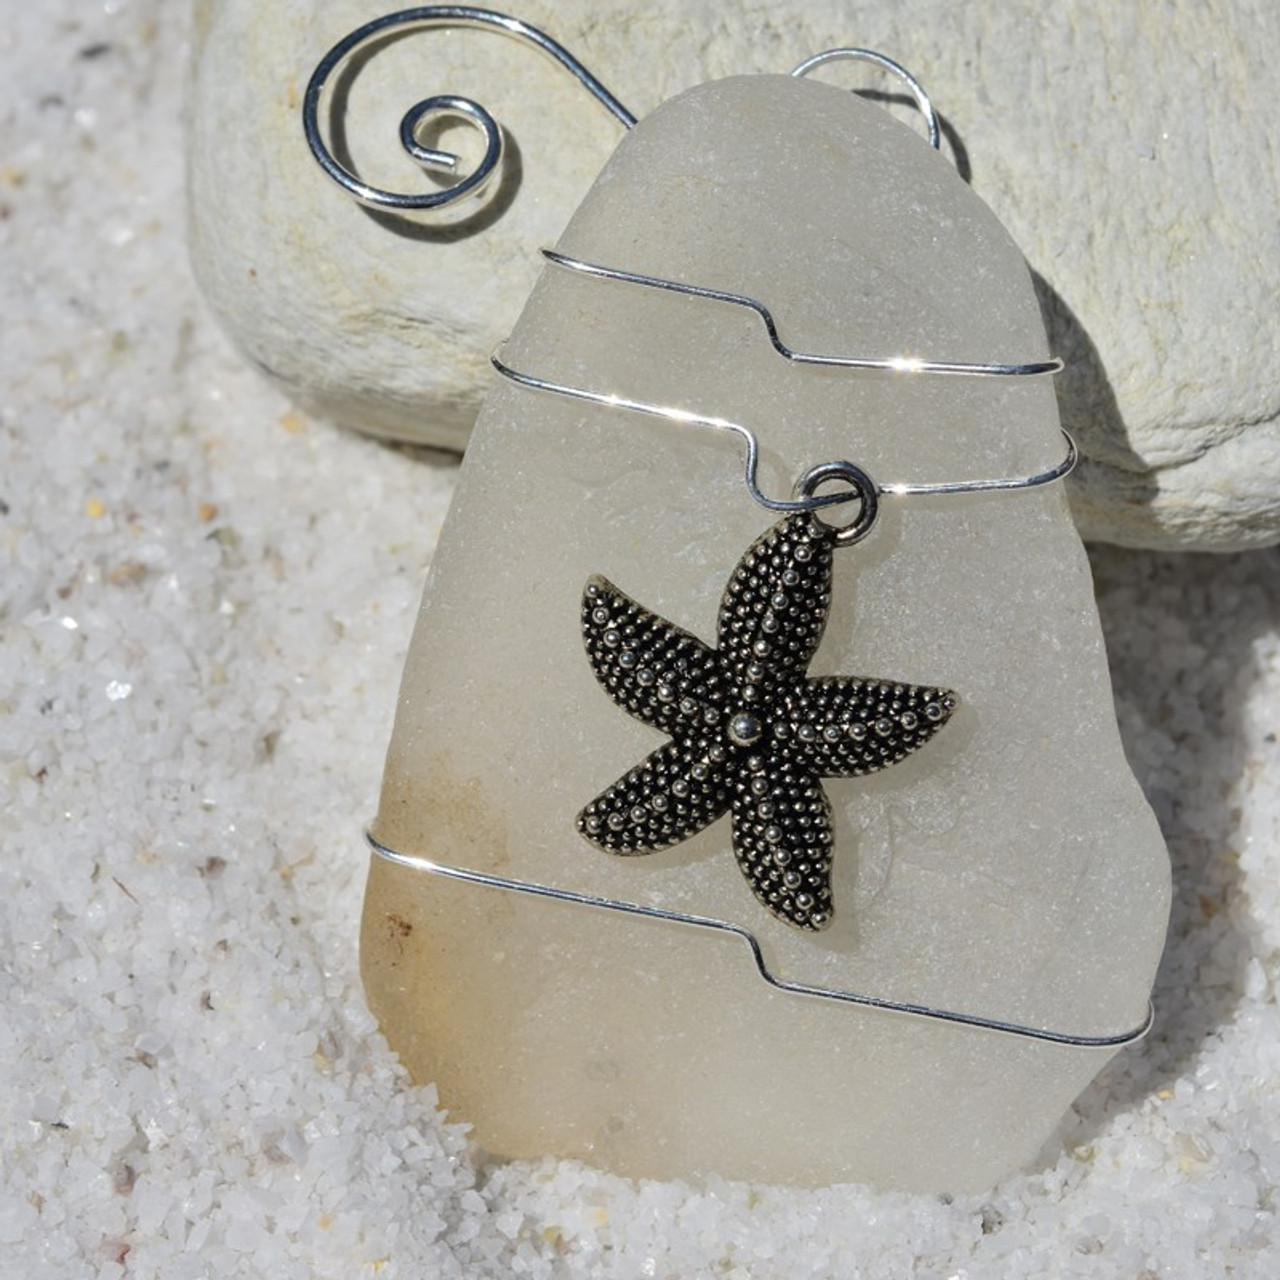 Starfish on a Surf Tumbled Sea Glass Ornament - Choose Your Color Sea Glass Frosted, Green, and Brown - Made to Order